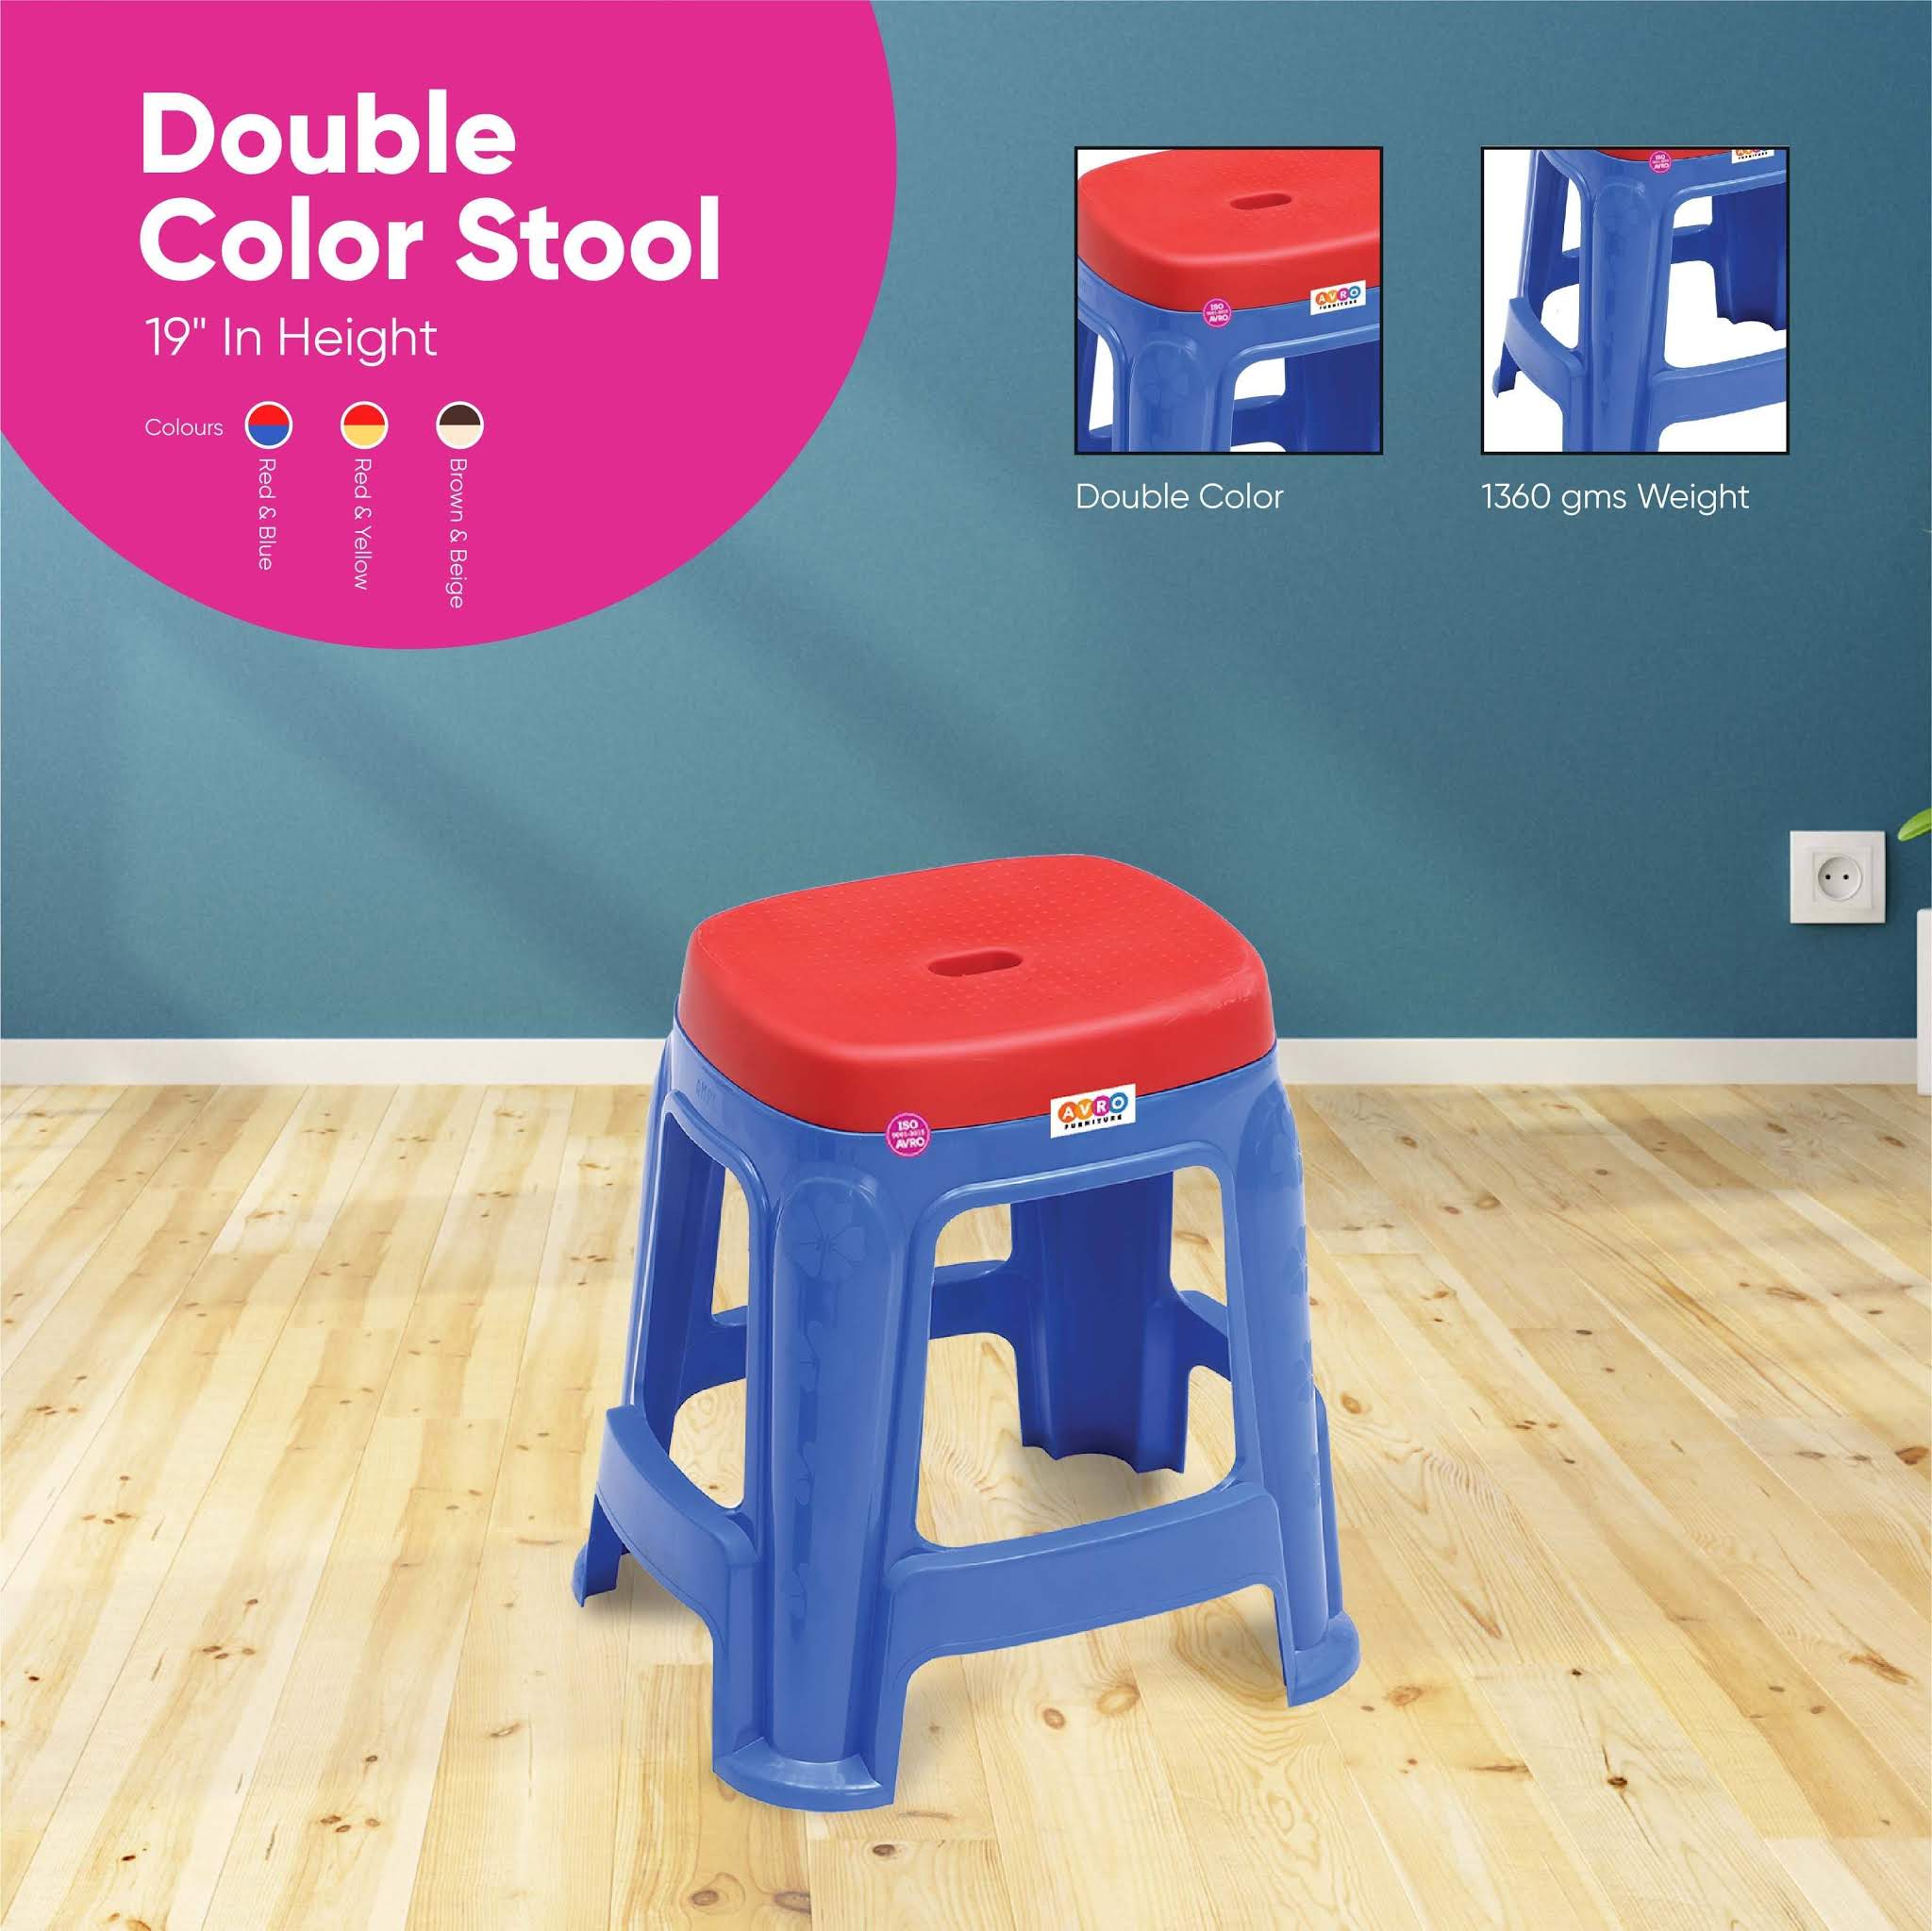 Five Factors to Consider Before Buying Stools